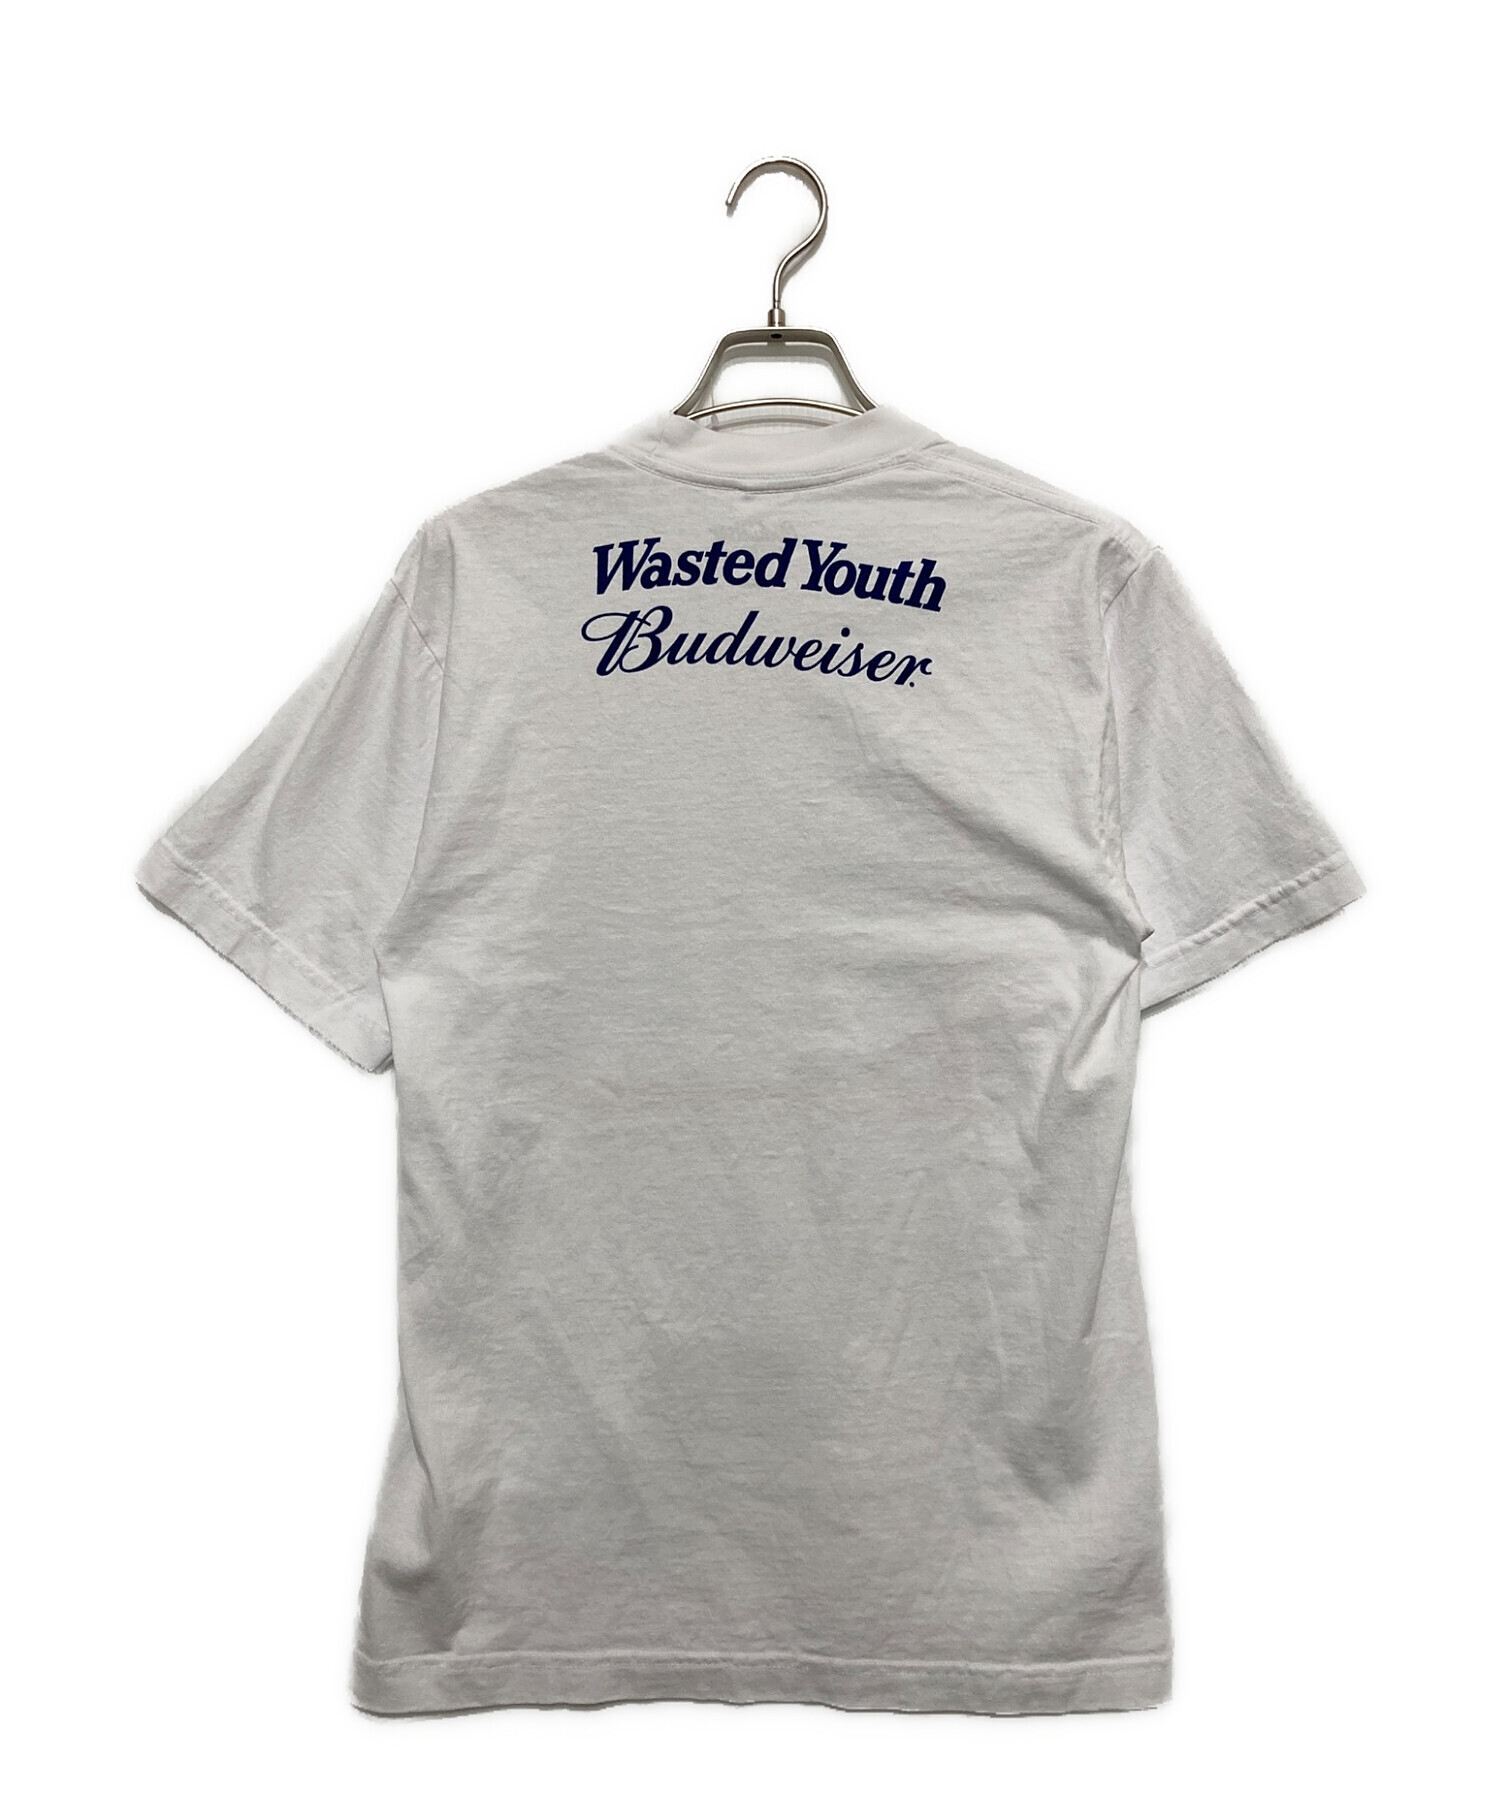 M Wasted Youth Budweiser T-SHIRT